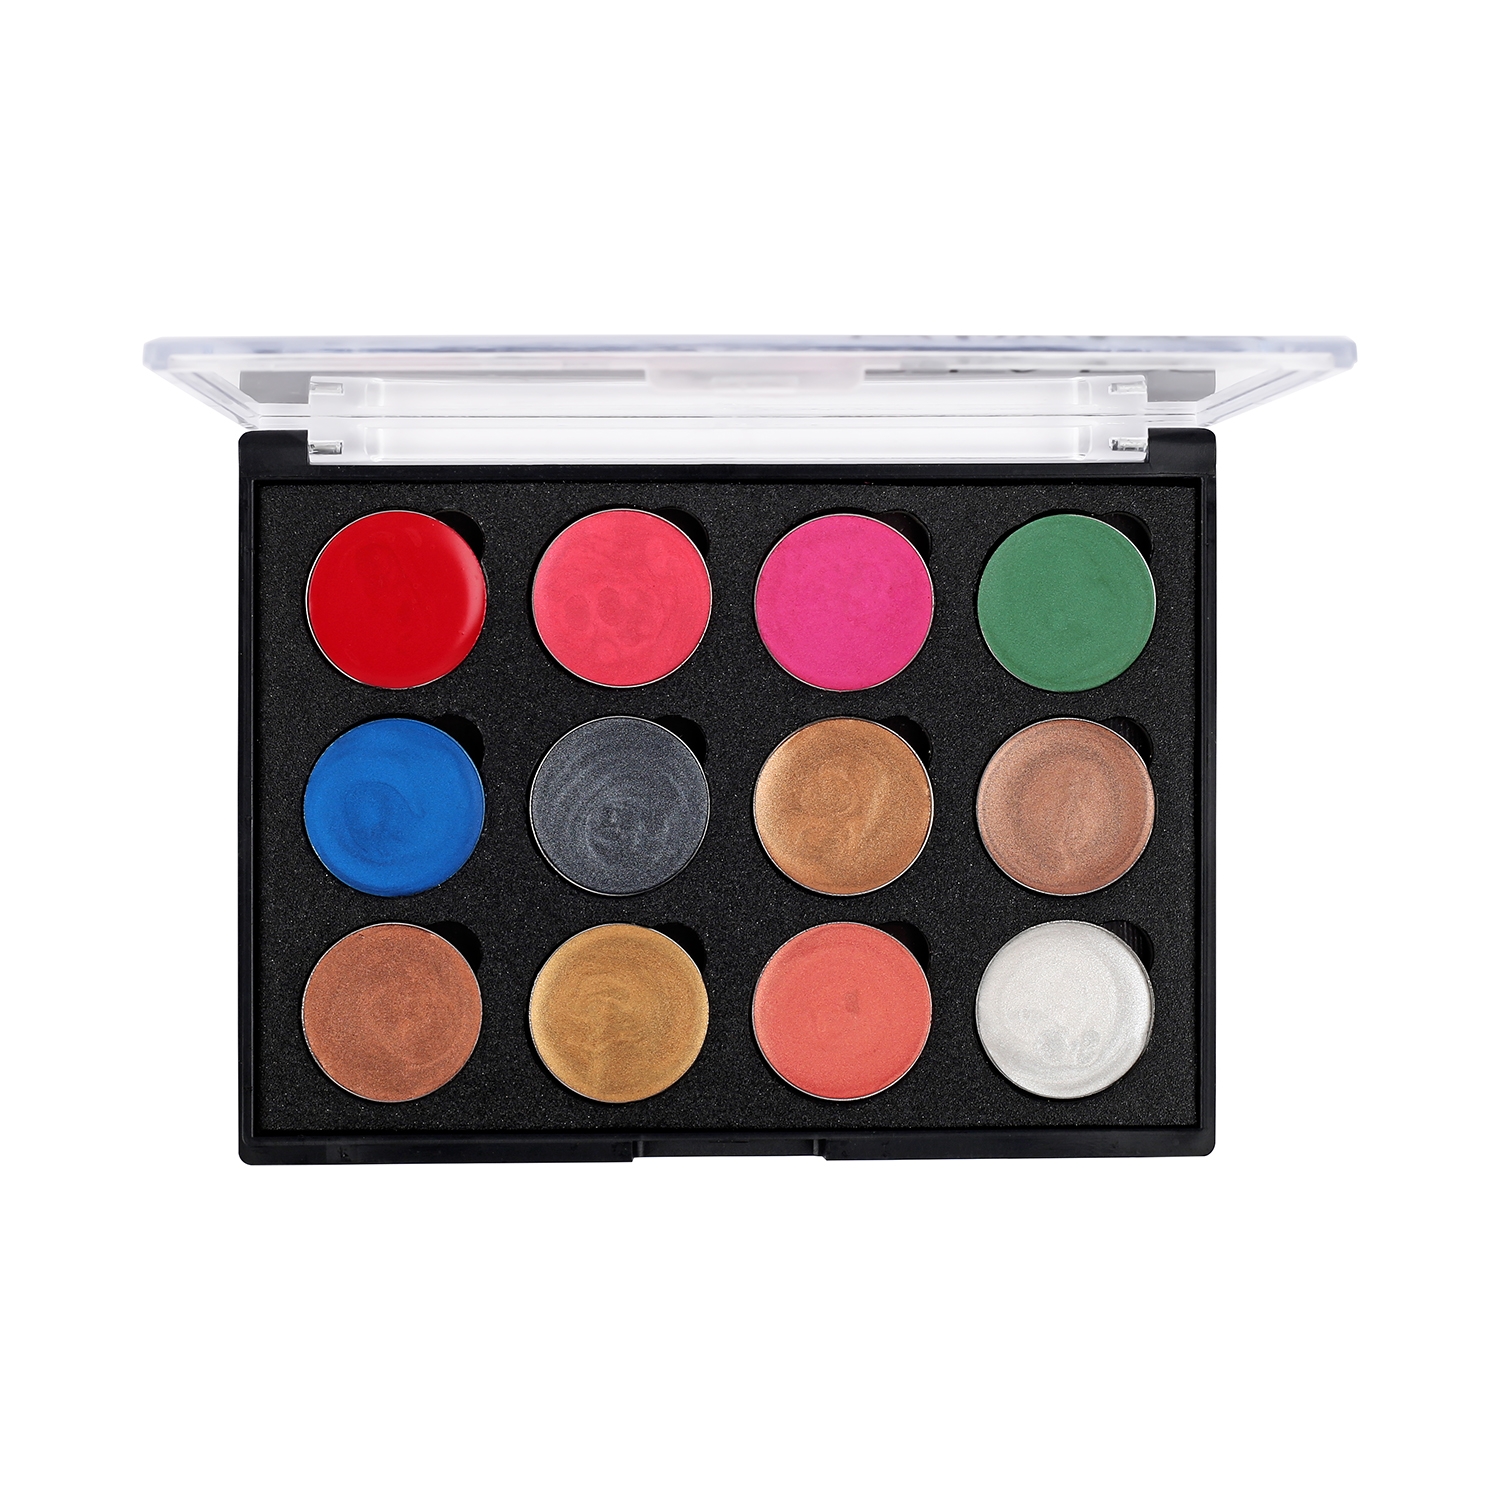 Stars Cosmetics Multicolor 12 Shades Face Makeup Eyeshade Cream Palette for  Eyshadow Color (36g)